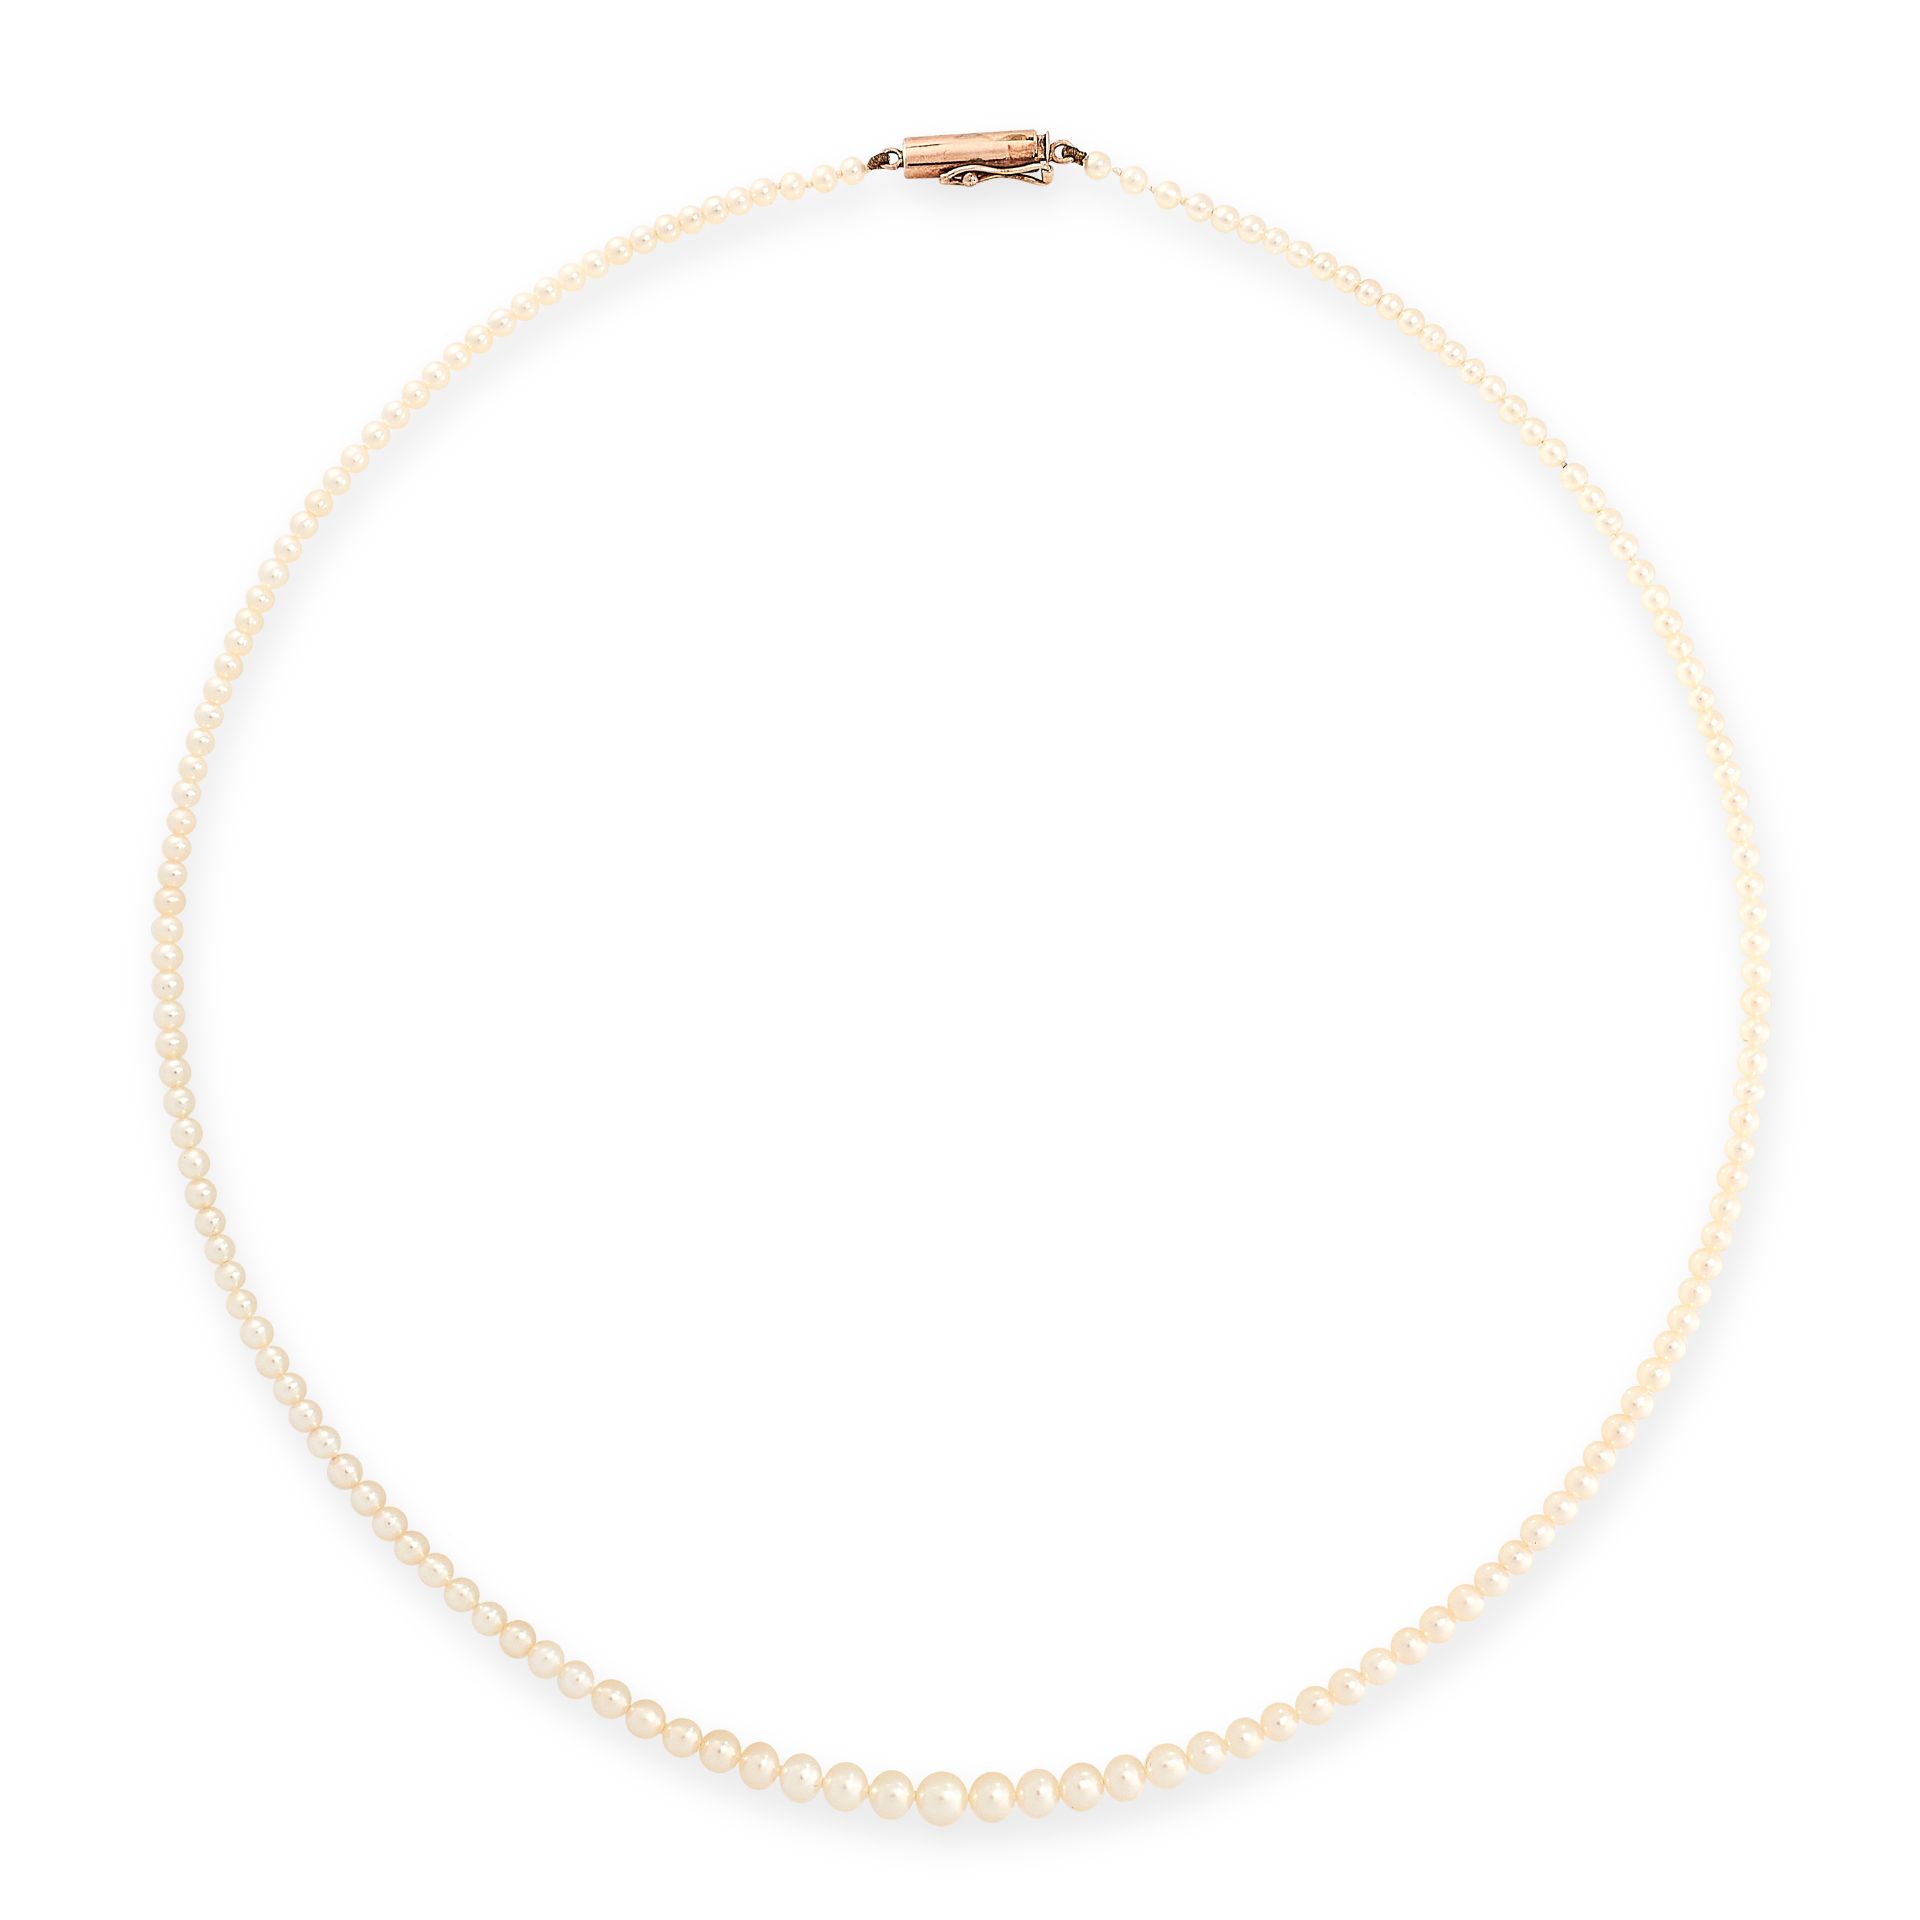 ANTIQUE NATURAL PEARL NECKLACE in yellow gold, comprising a single row of one hundred and fifty-four